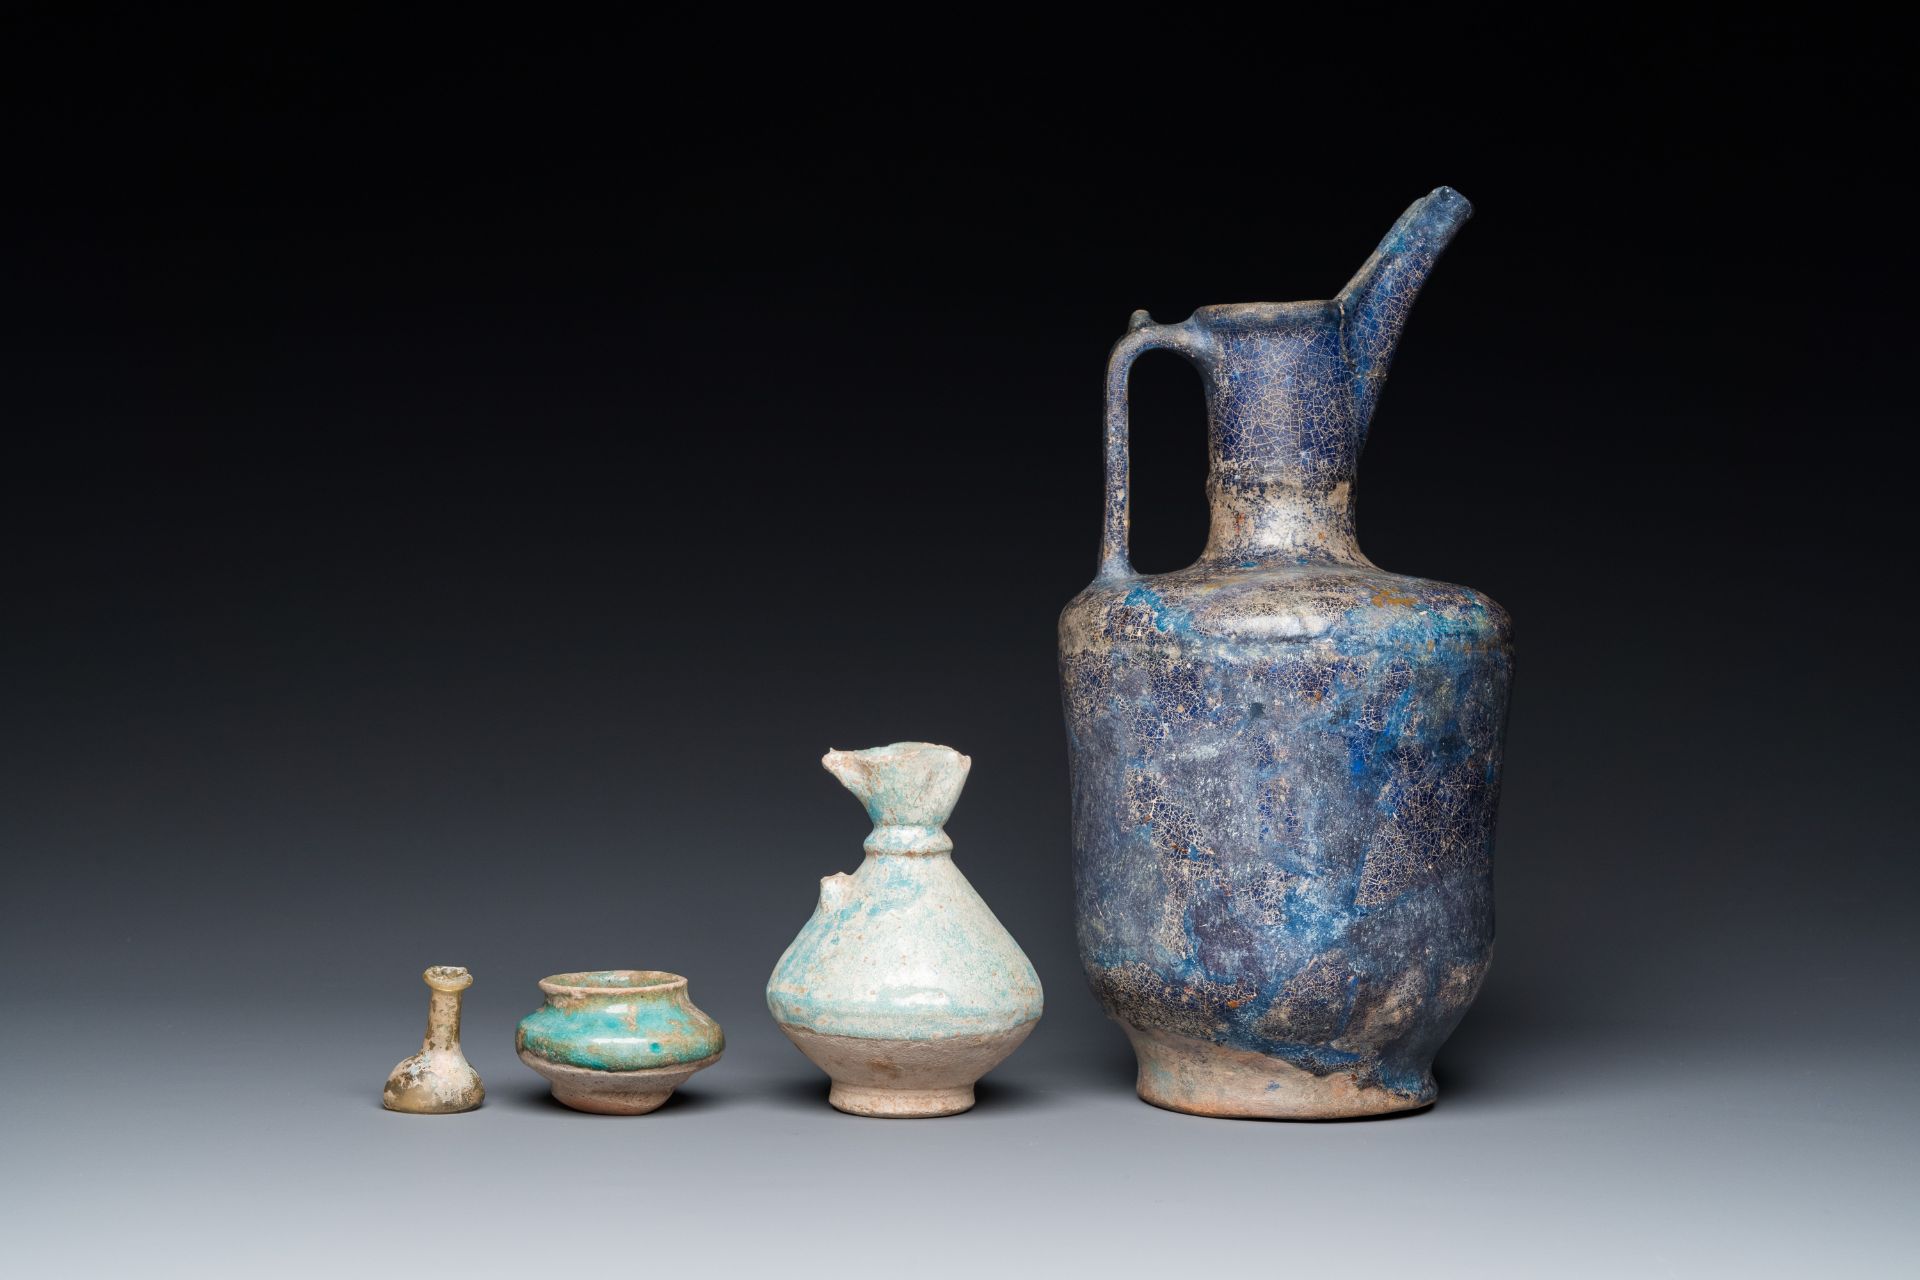 Twelve Ottoman and Persian pottery wares, 13th C. and later - Image 21 of 34